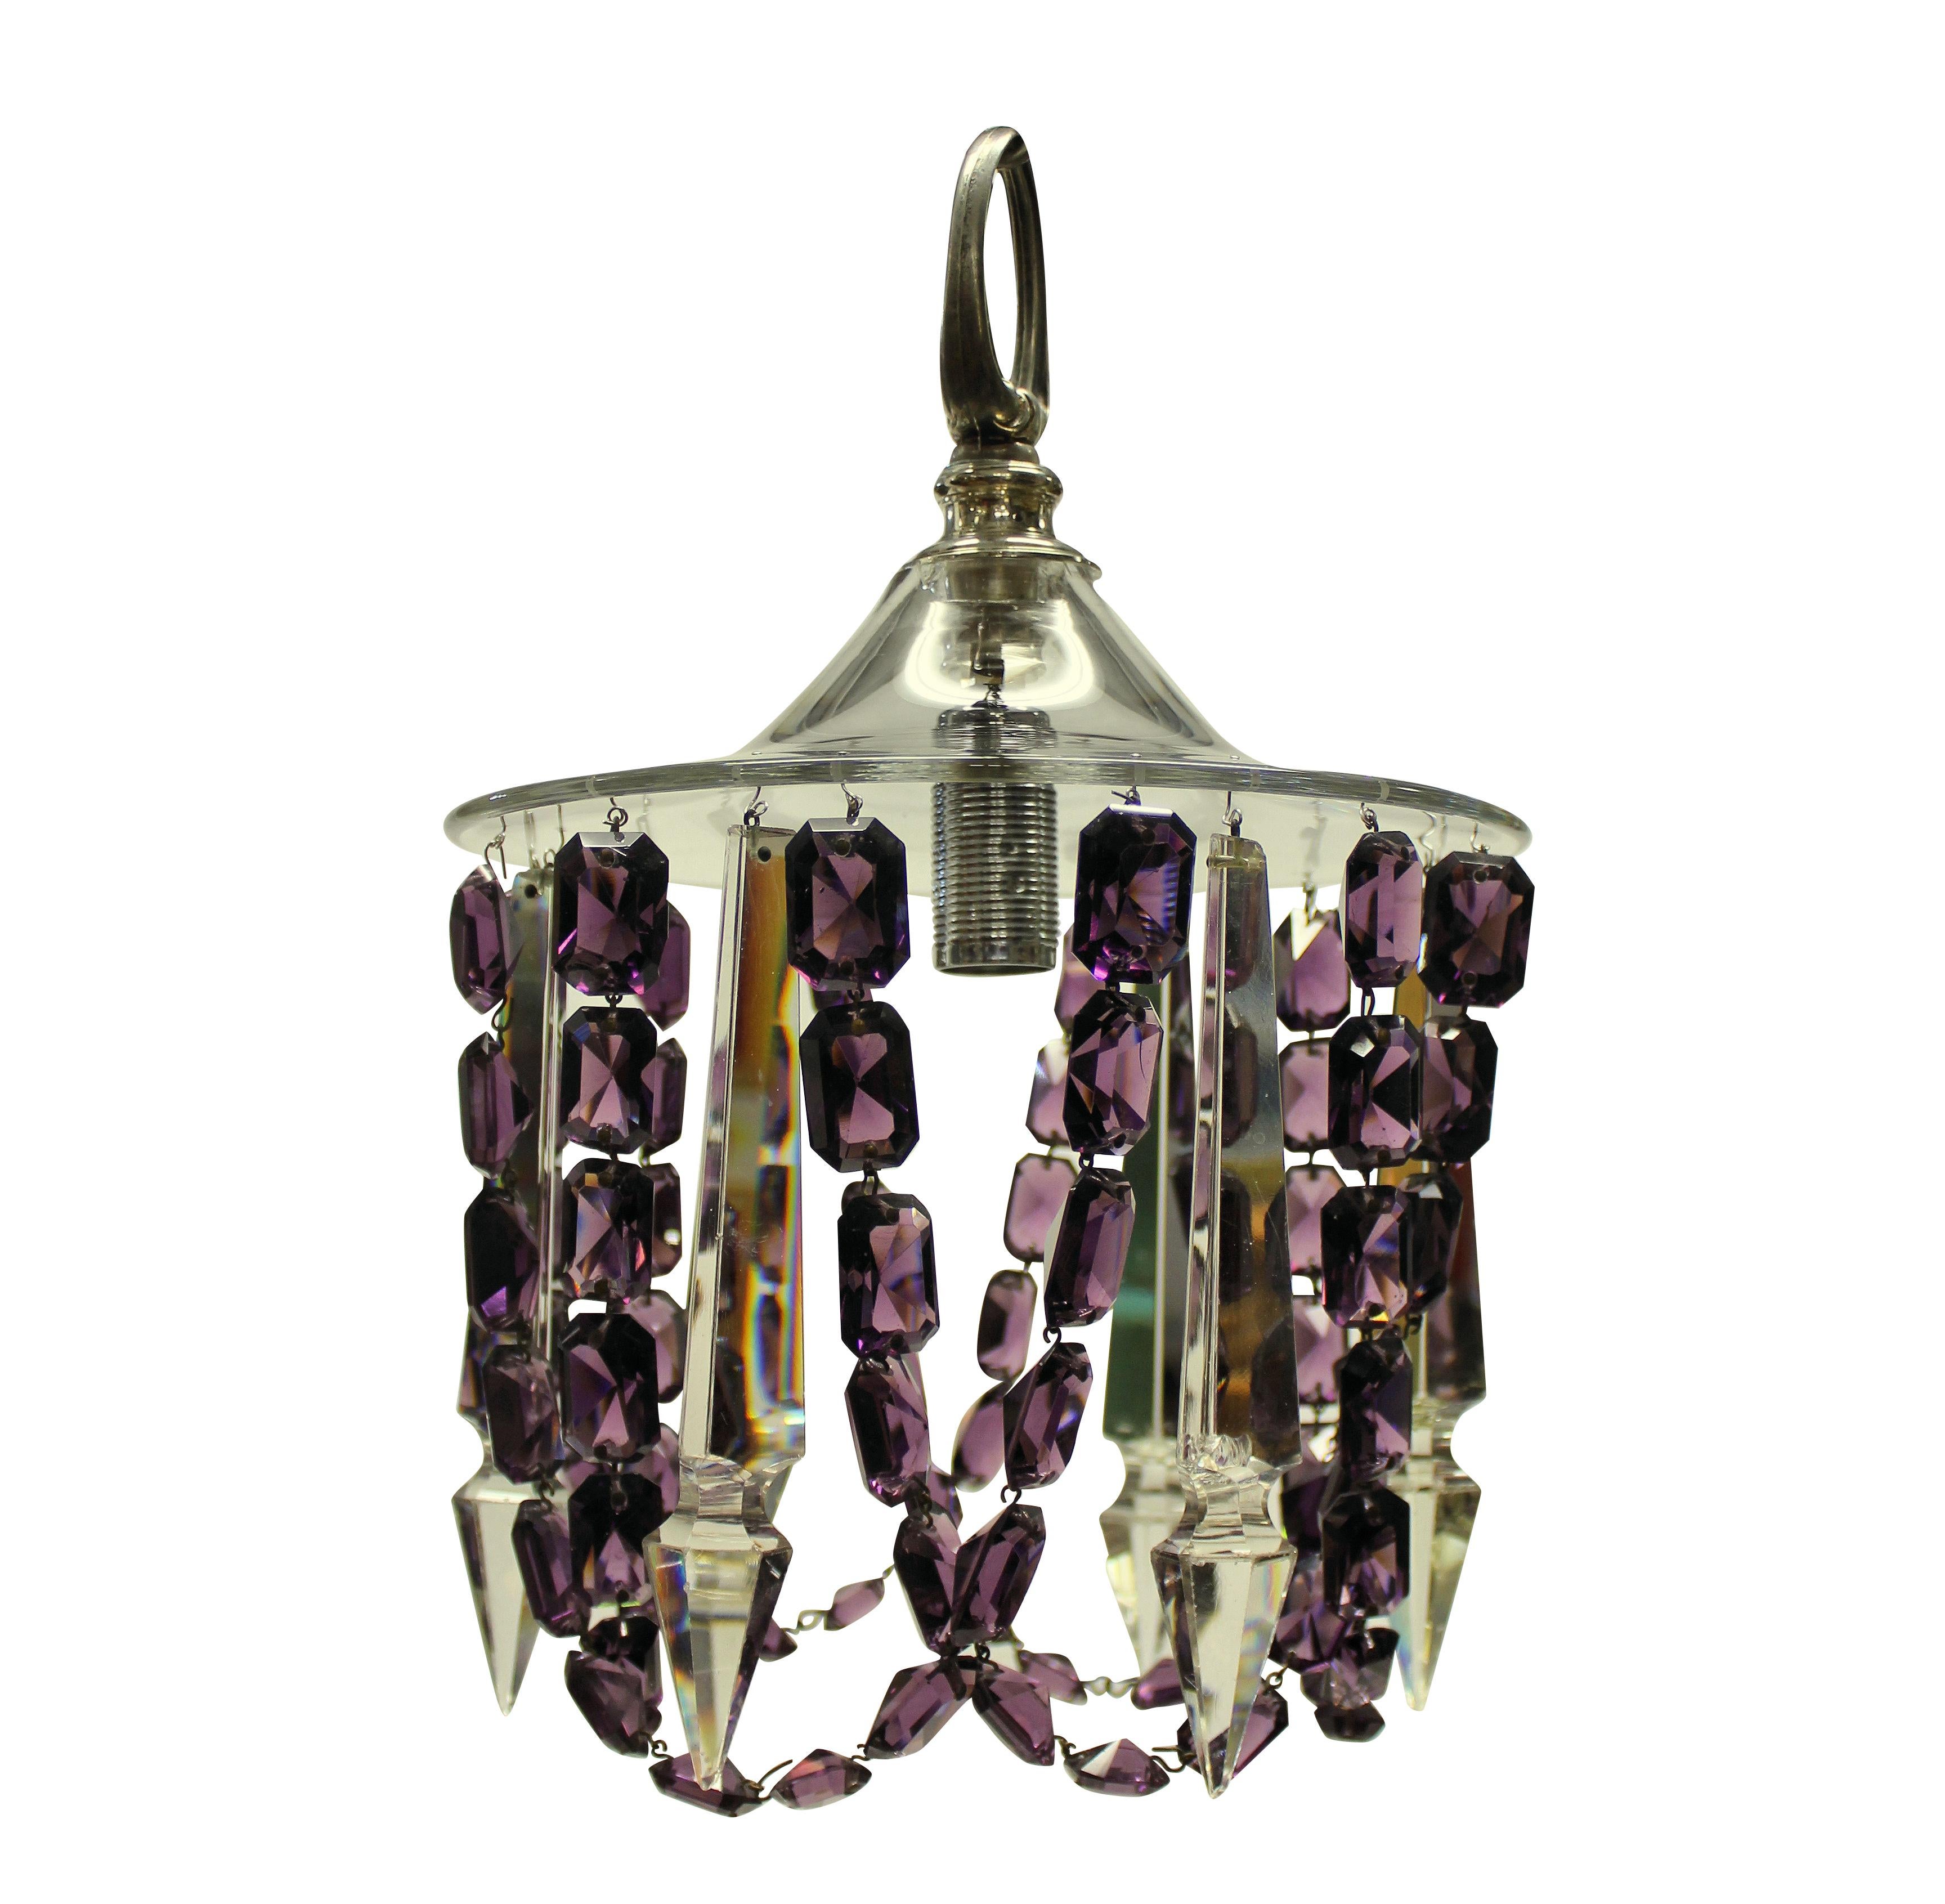 Mid-20th Century Pair of Small Cut Glass Ceiling Lights with Amethyst Glass